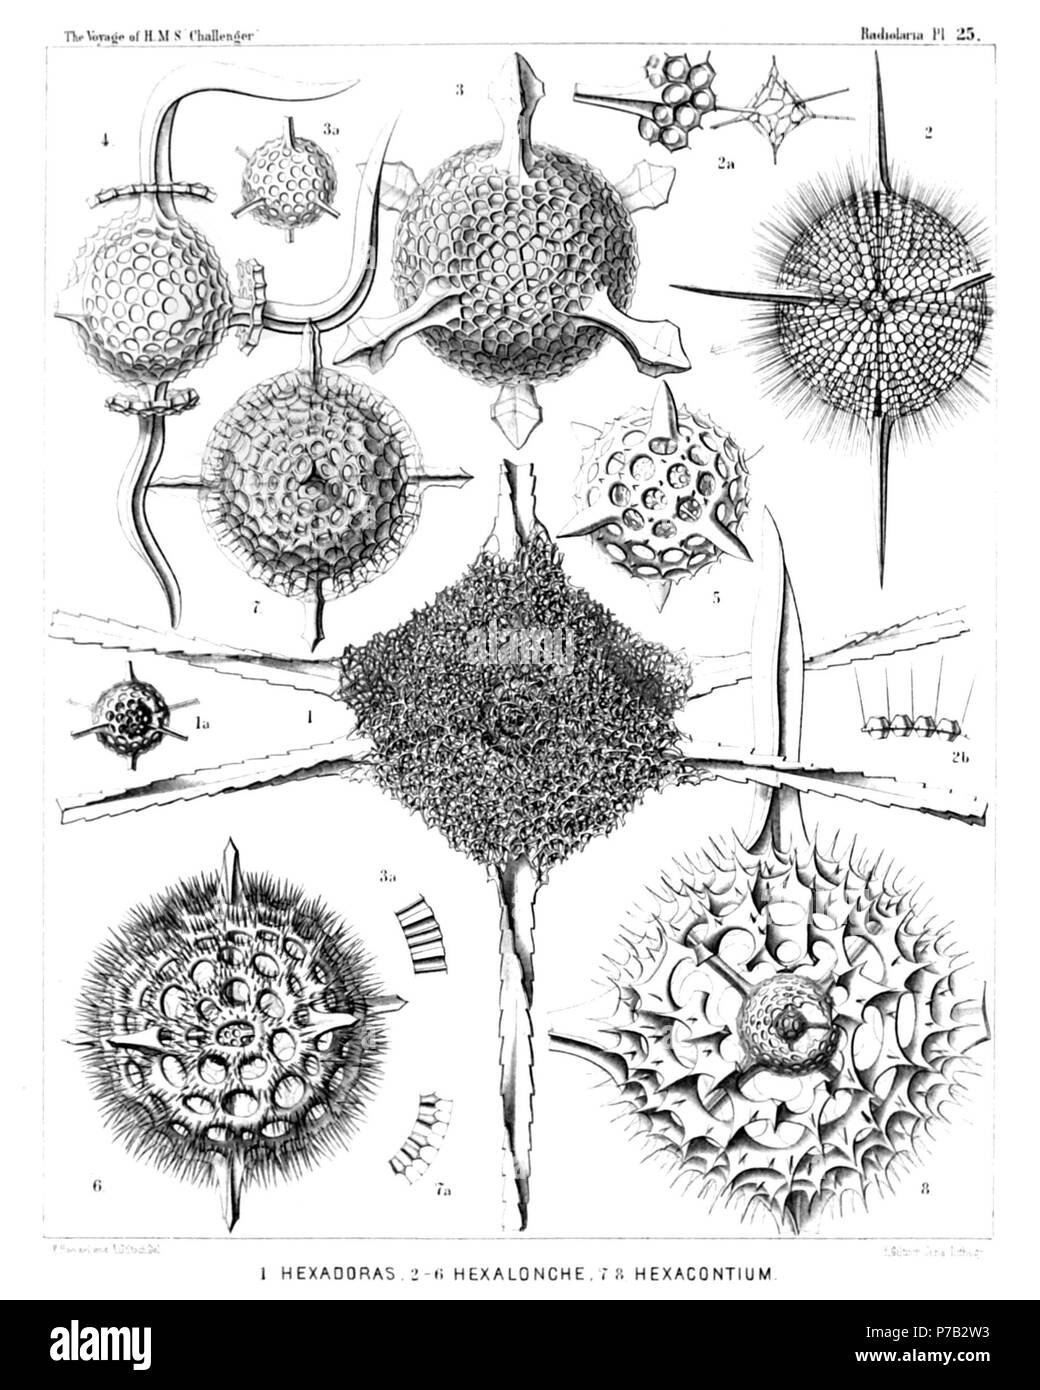 English: Illustration from Report on the Radiolaria collected by H.M.S. Challenger during the years 1873-1876. Part III. Original description follows:  Plate 25. Cubosphærida.  Diam.  Fig. 1. Hexadoridium streptacanthum, n. sp., × 400  Fig. 1a. The two concentric medullary shells.  Fig. 2. Hexalonche amphisiphon, n. sp., × 300  Fig. 2a. Medullary shell connected with a fragment of the cortical shell.  Fig. 2b. Vertical section through the wall of the cortical shell. (Below the centre of the Plate, also lettered 3a by mistake.)  Fig. 3. Hexalonche rosetta, n. sp., × 400  Fig. 3a. Medullary shel Stock Photo